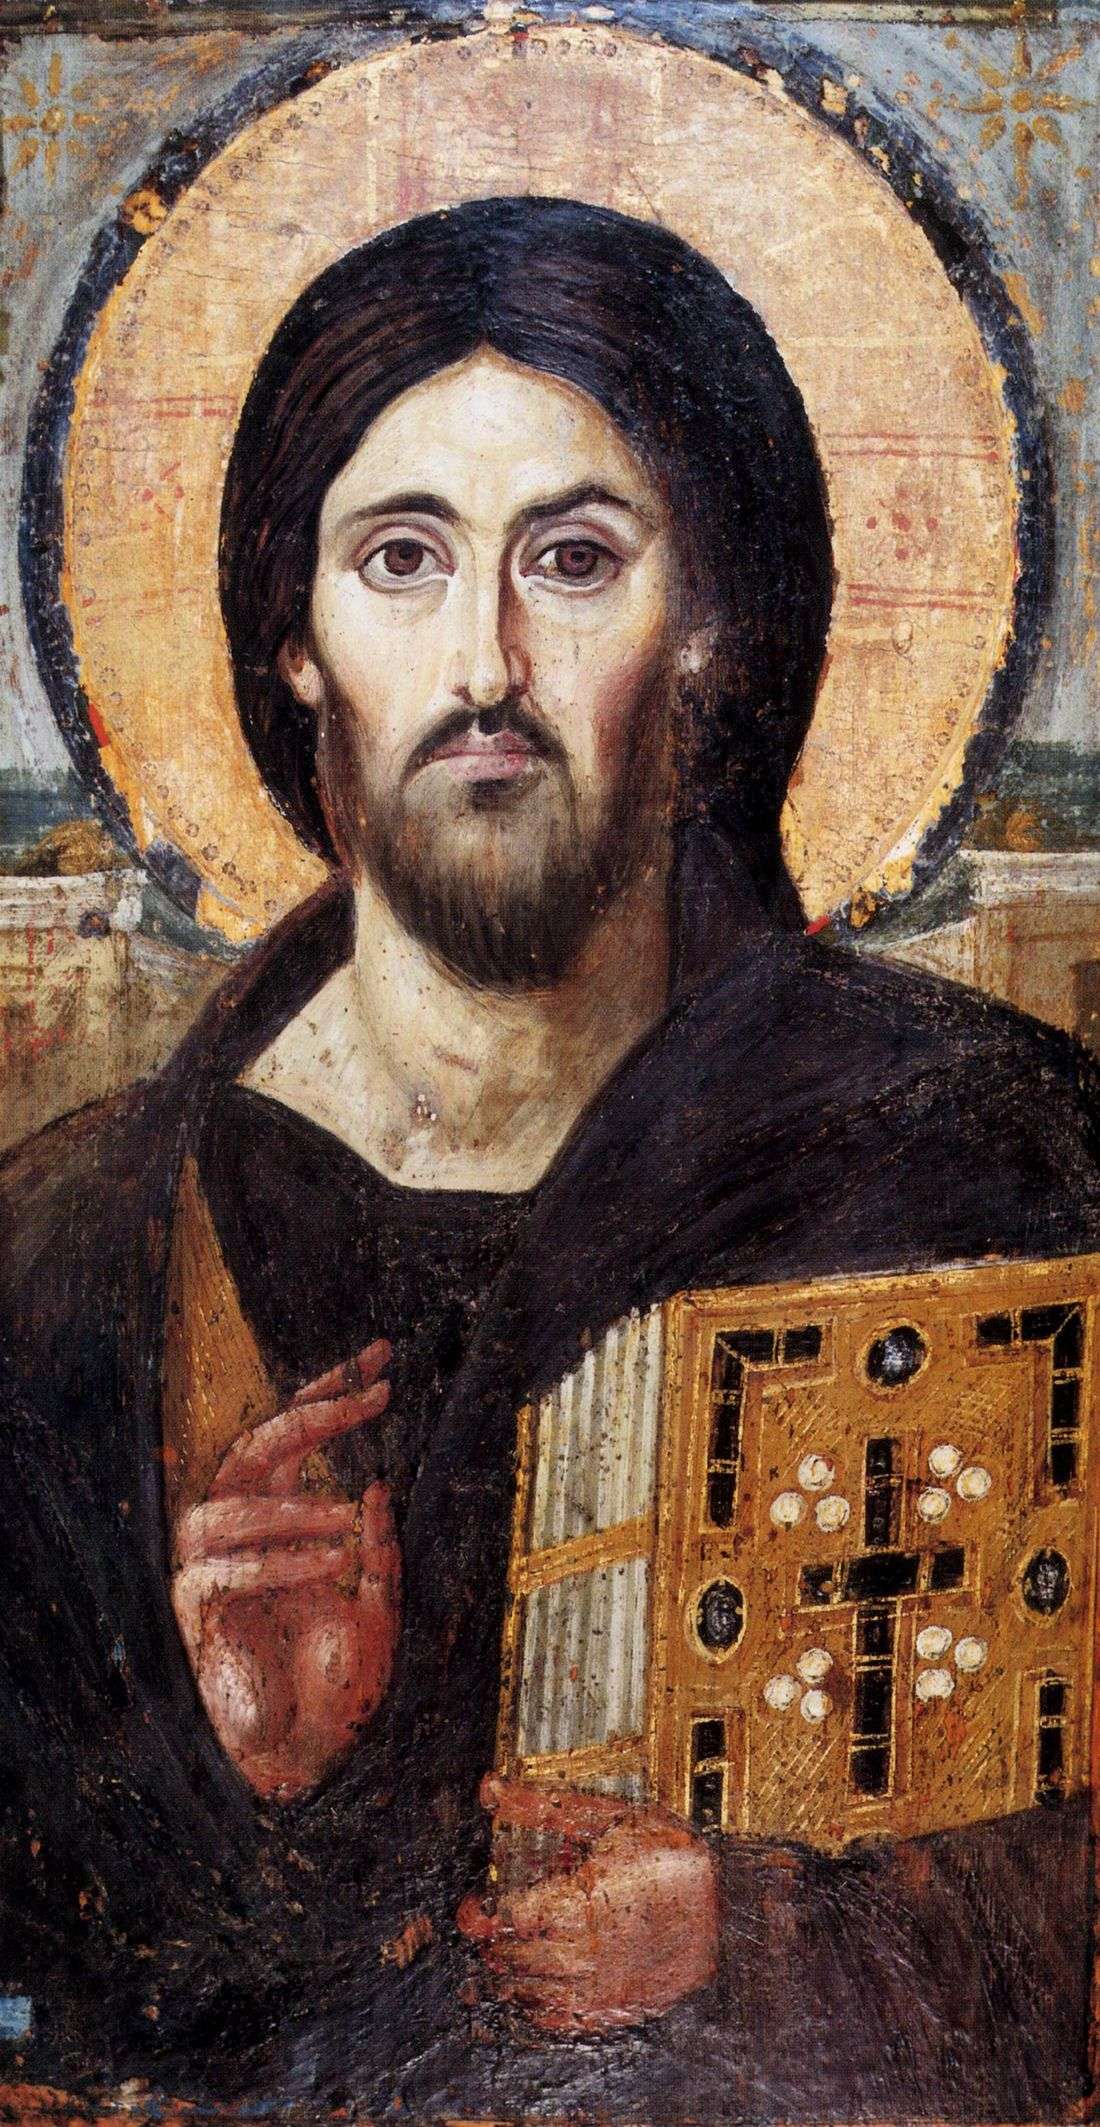 Christ Blessing, first half of the 6th century, encaustic on panel, 84 x 45.5 x 1.2 cm (The Holy Monastery of Saint Catherine, Sinai, Egypt)